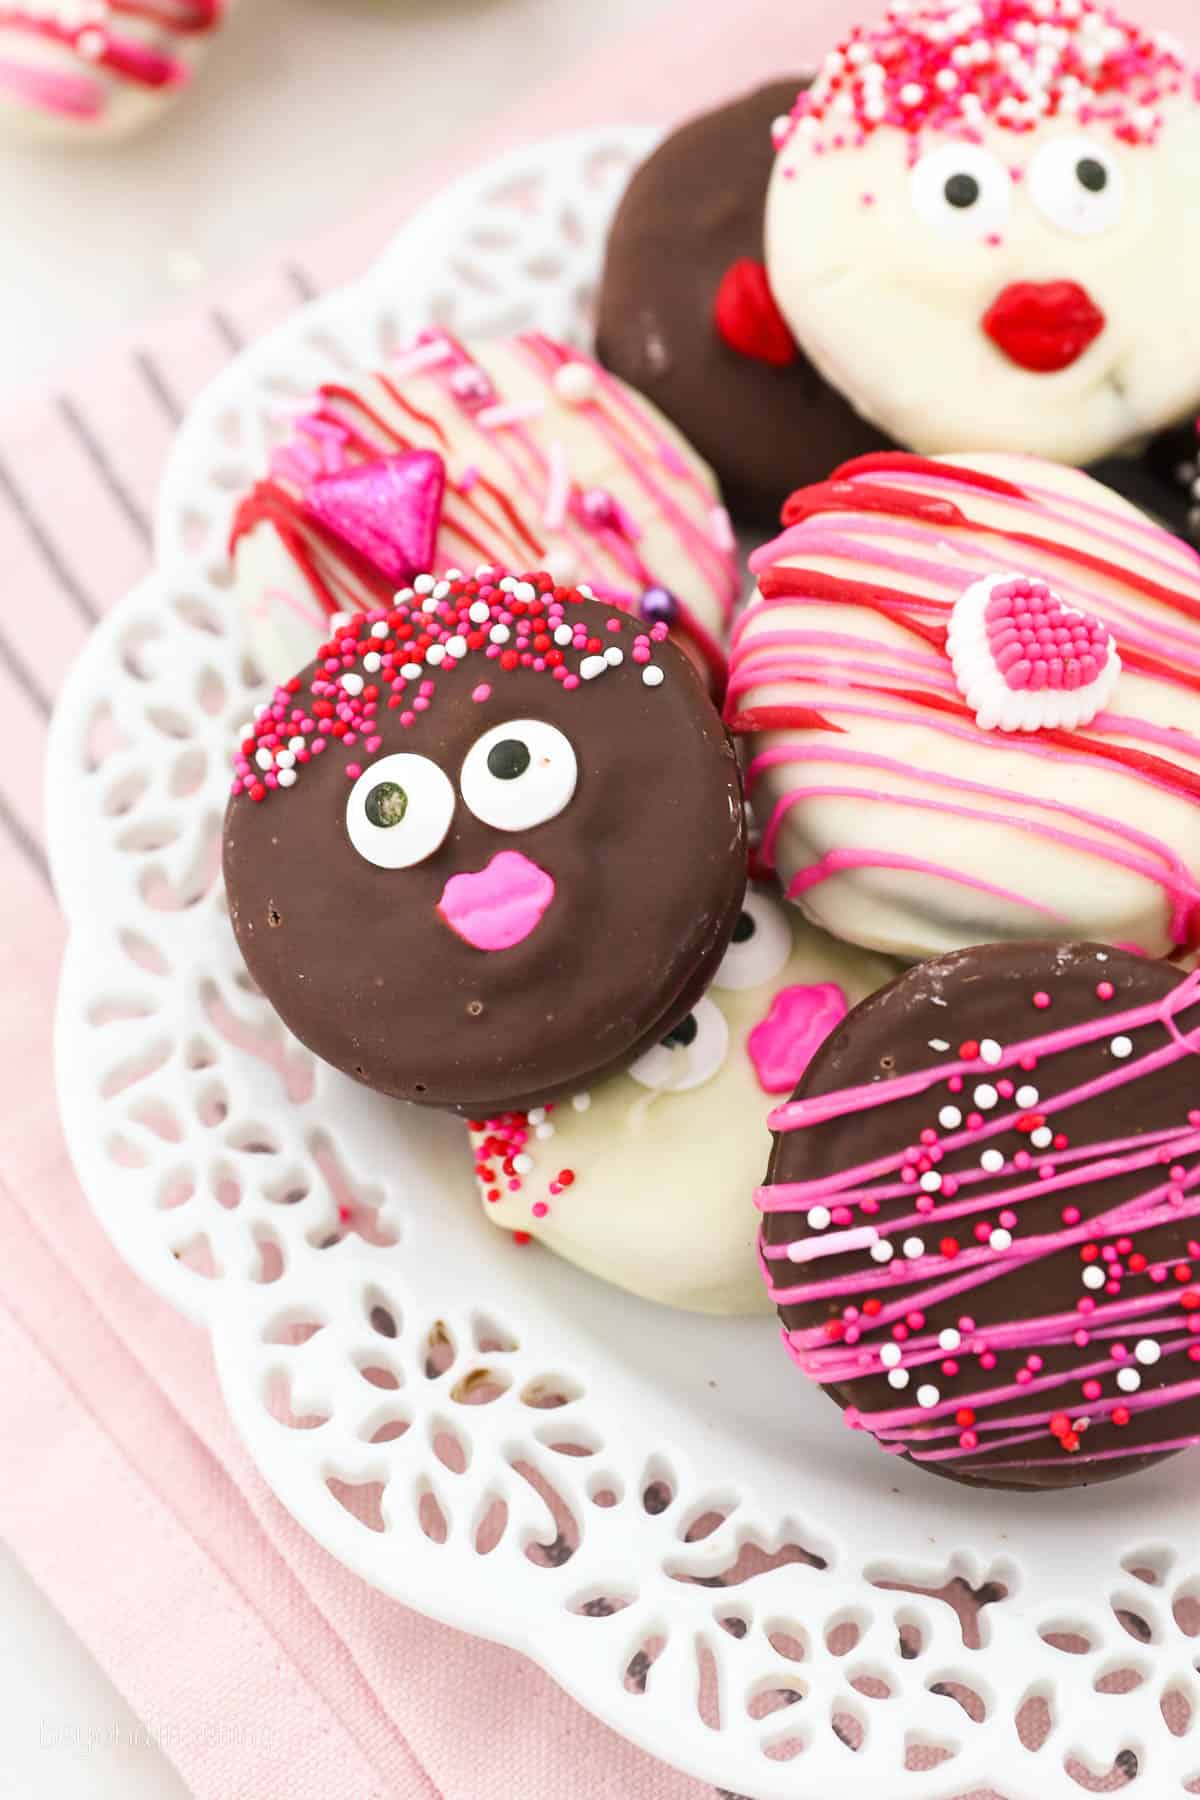 An image of chocolate covered Oreos decorated for Valentine's Day